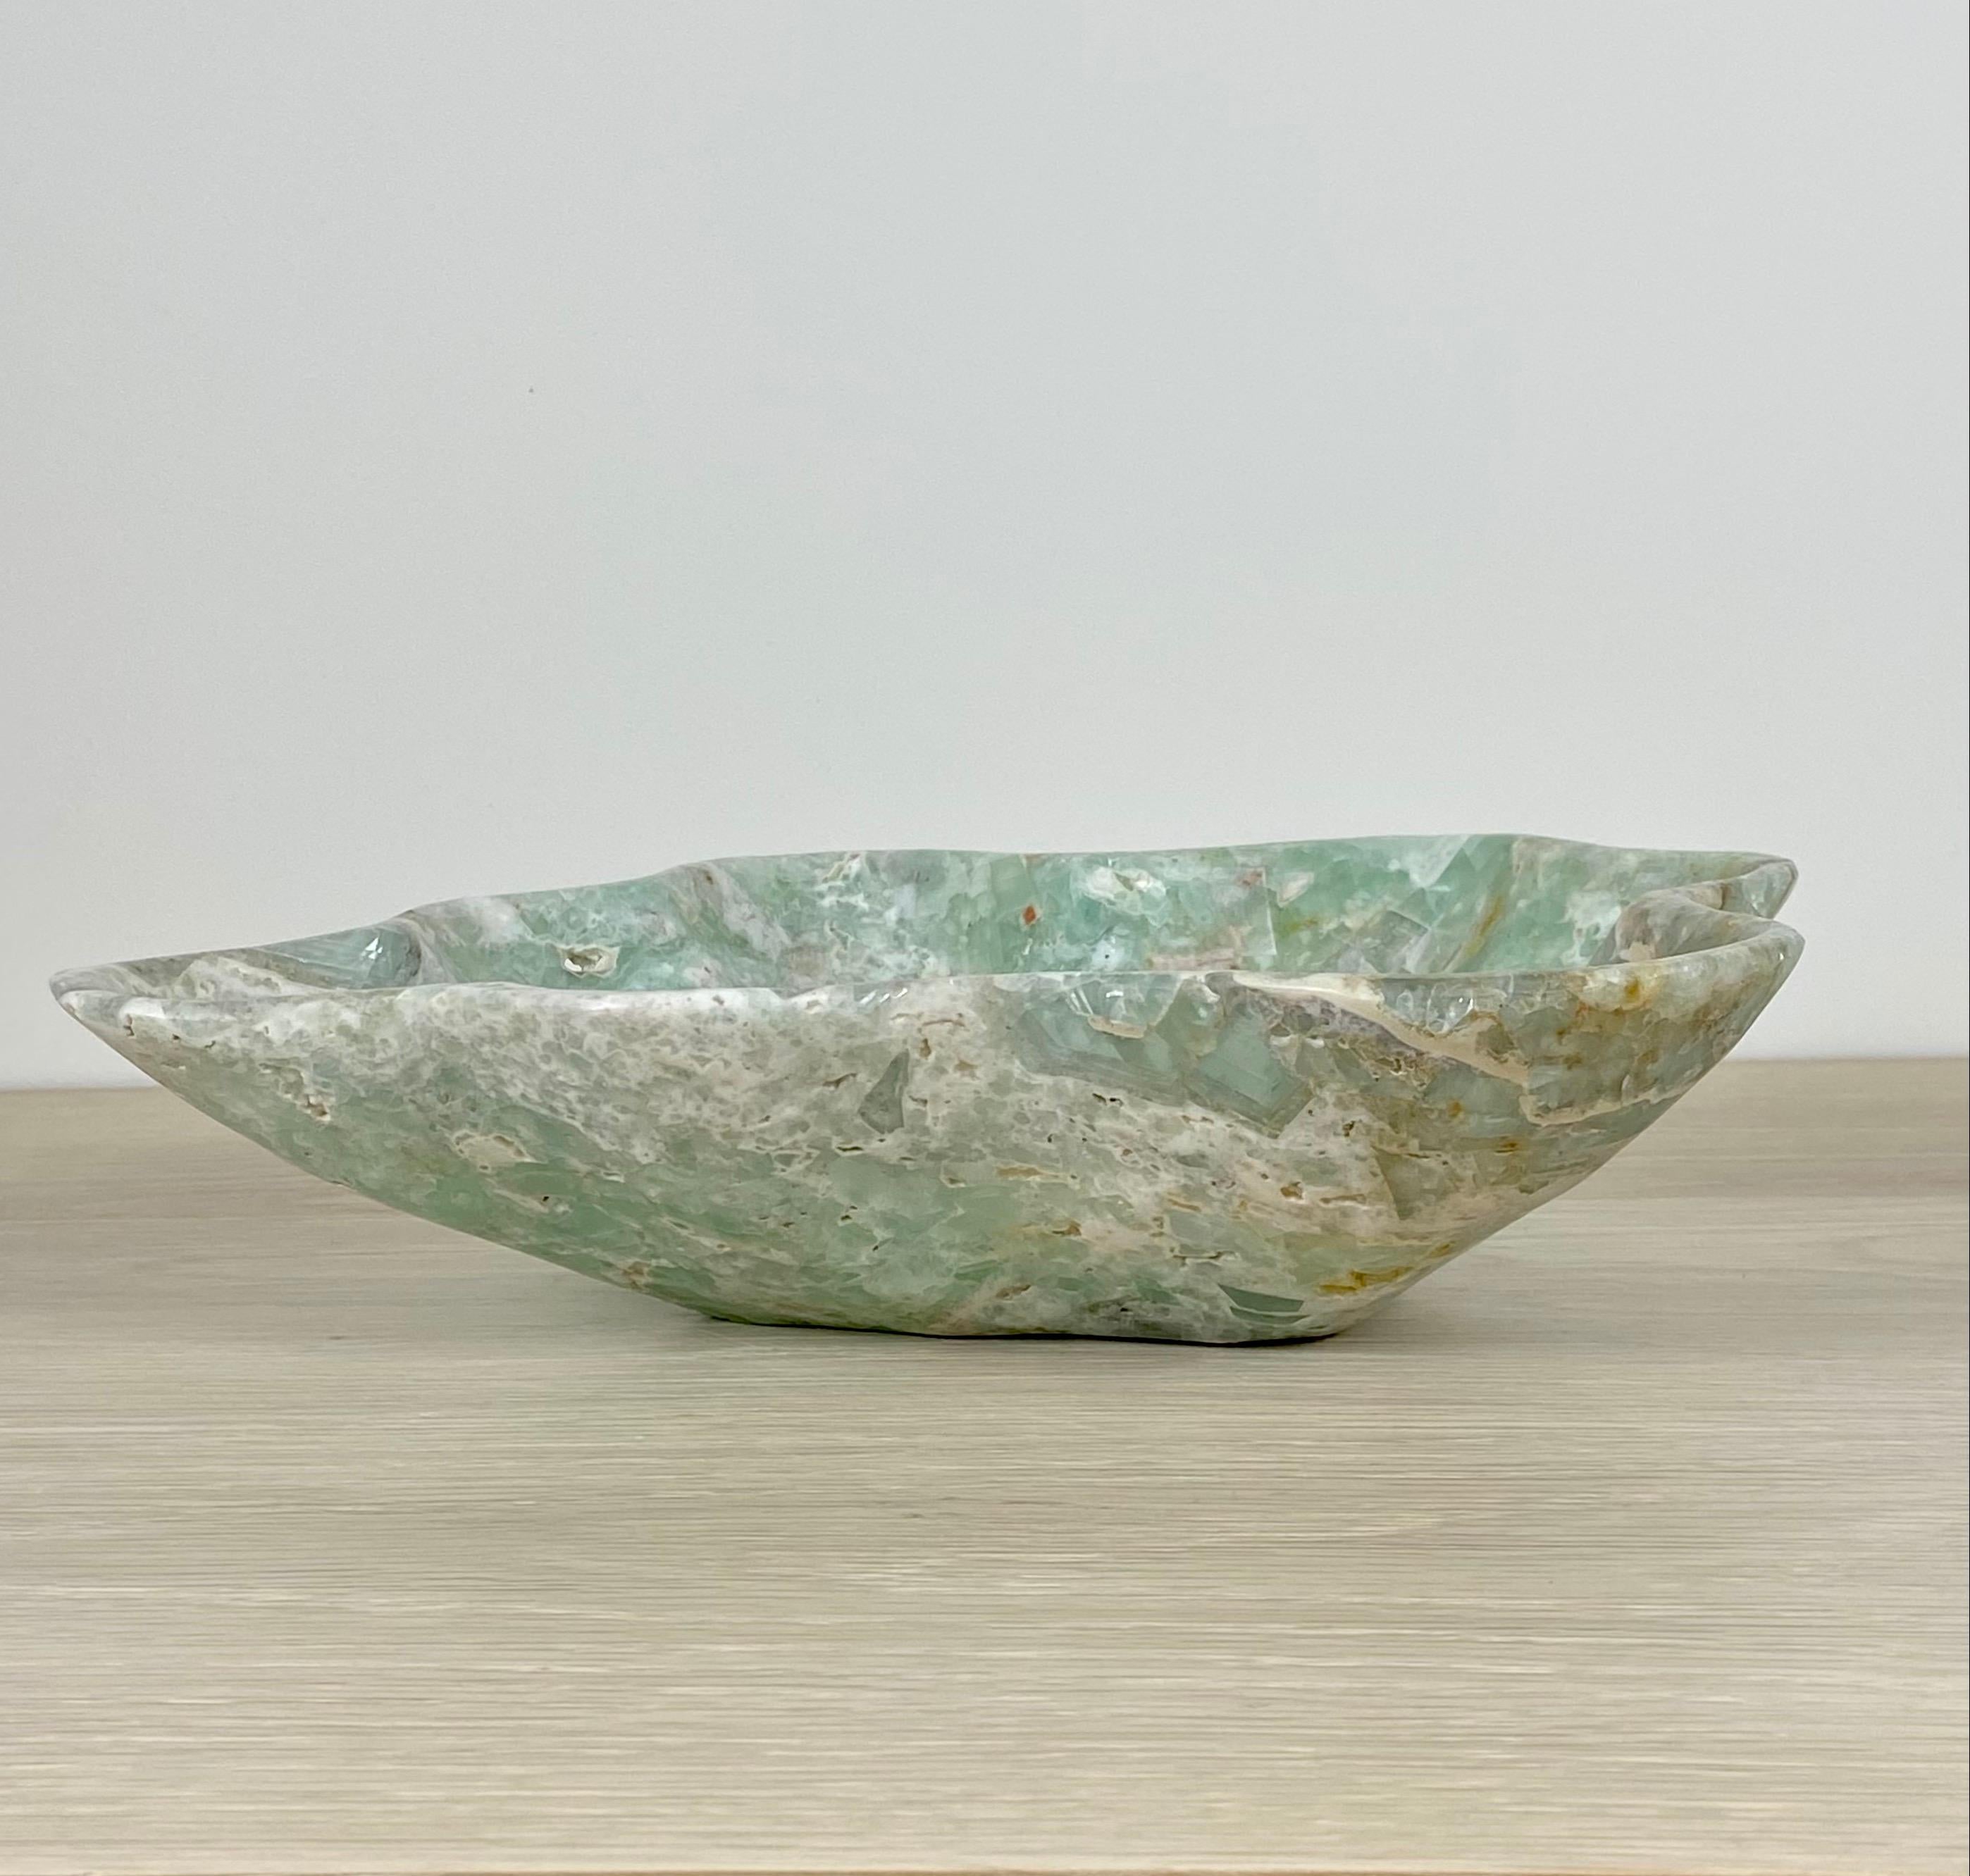 An unusual and very pretty small green onyx bowl with beautiful veining. This one of a kind decorative bowl is meticulously hand-carved from a single piece of onyx by skilled artists to reveal its' inherent characteristics. This stone bowl is a